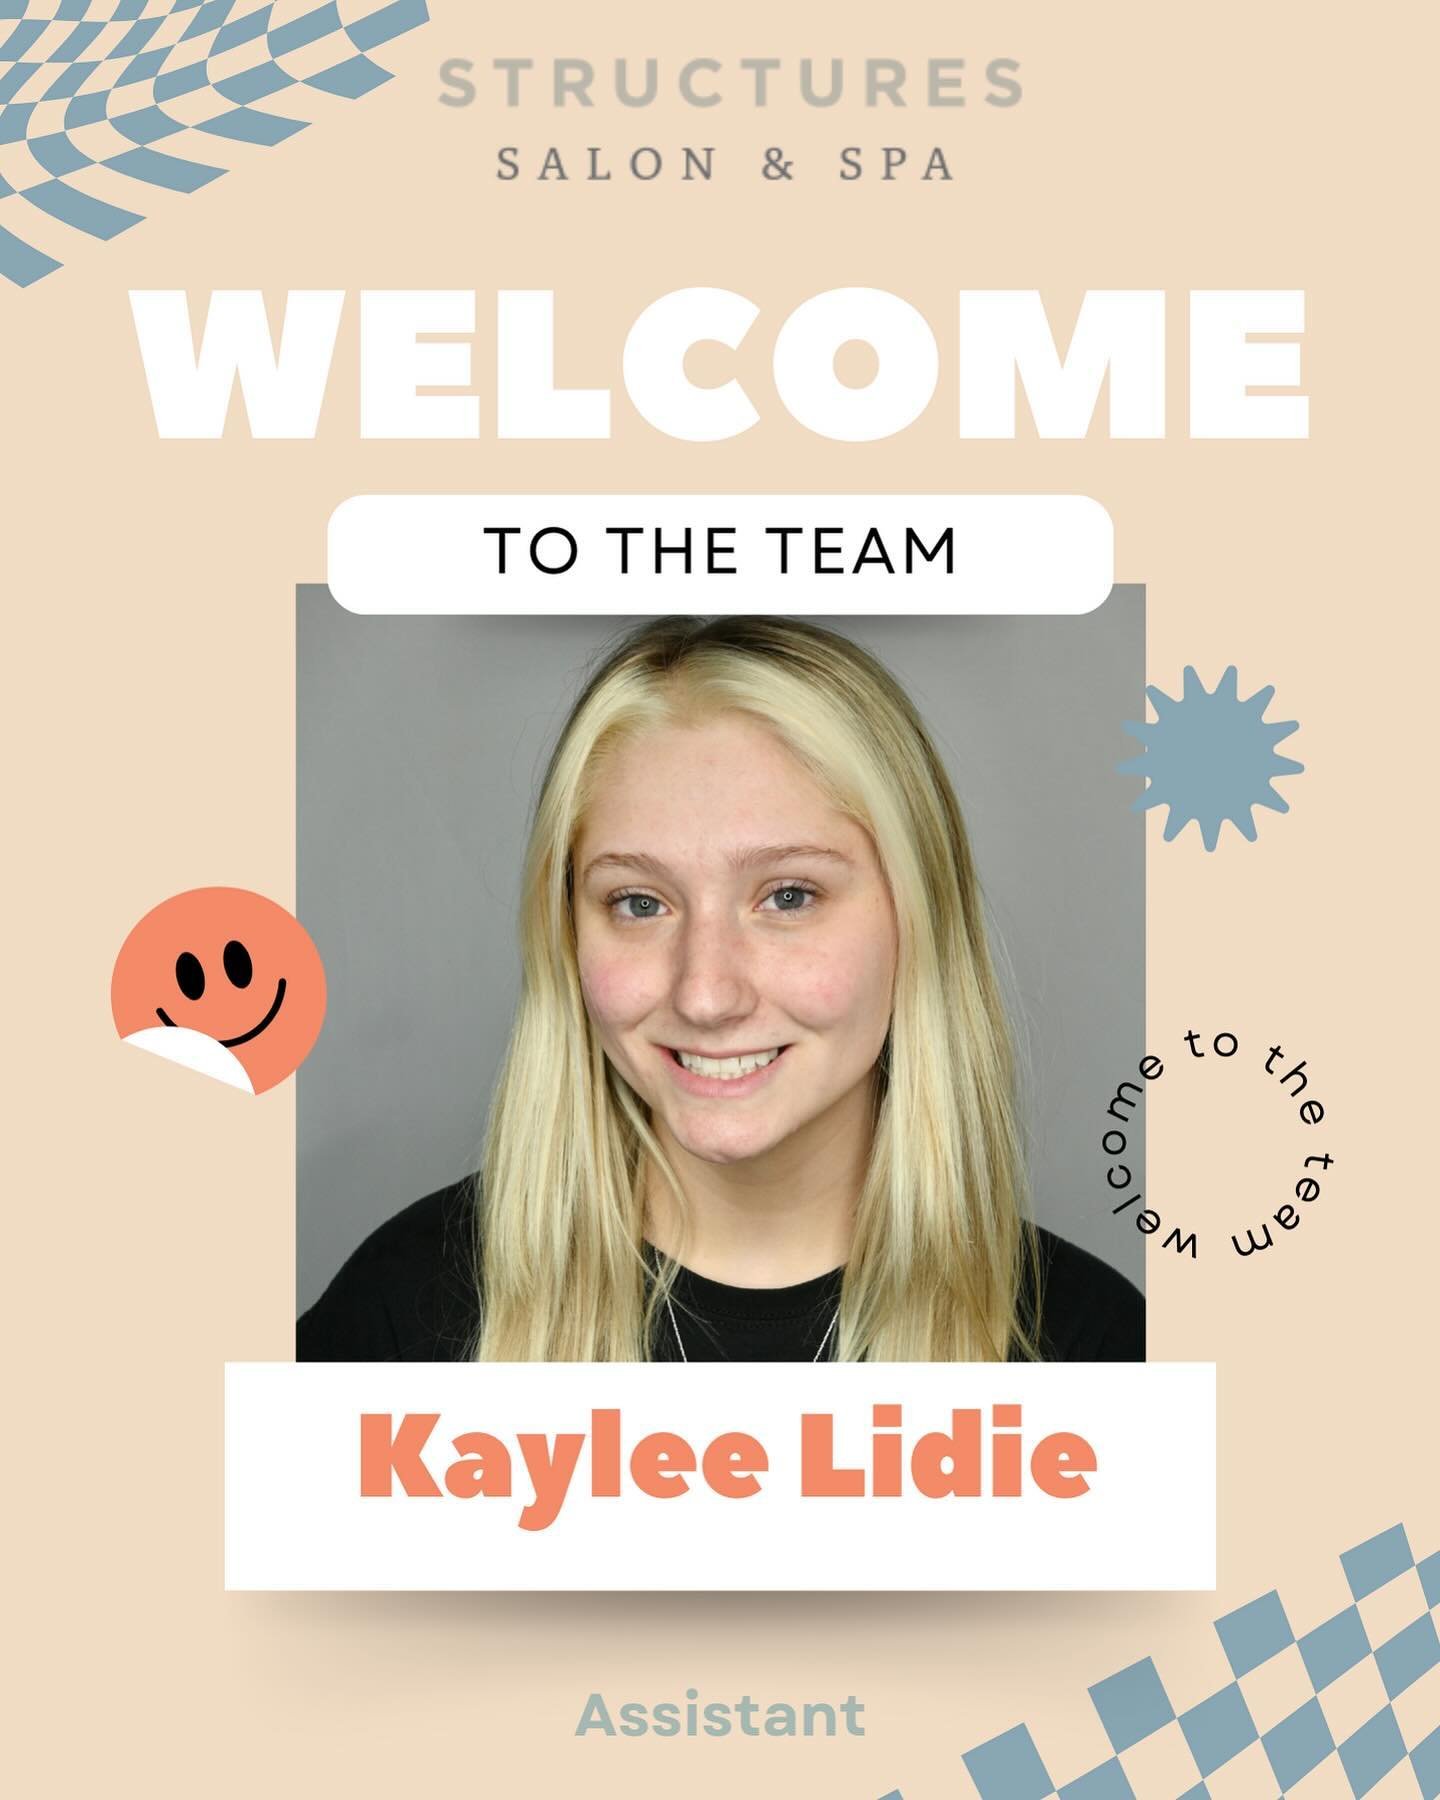 🥳Let&rsquo;s give a warm welcome to our new assistant Kaylee! She is a student at the Temple school, and is eager to learn more about hair at Structures! Welcome Kaylee!!🥳